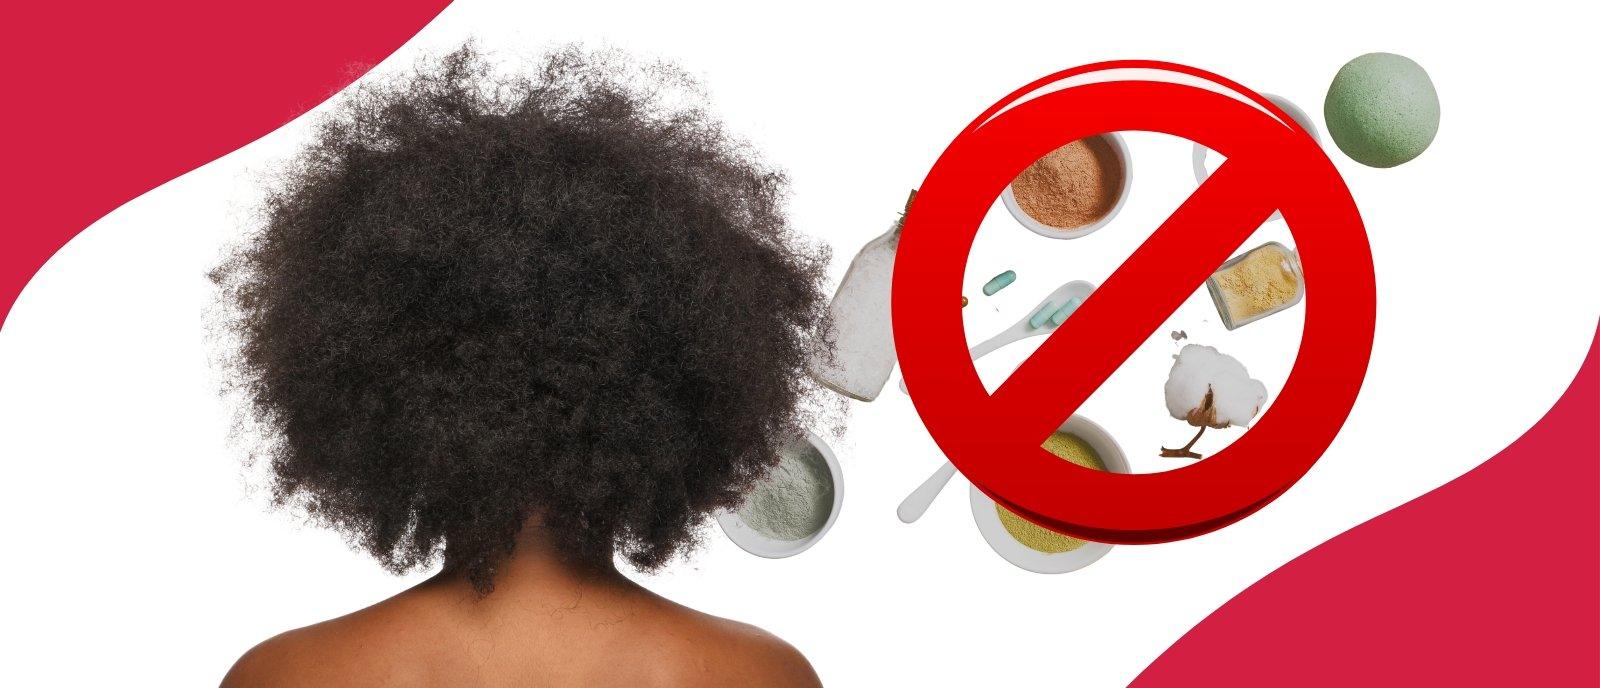 Hair Care Products Ingredients That You Should Avoid - GlammedNaturallyOil